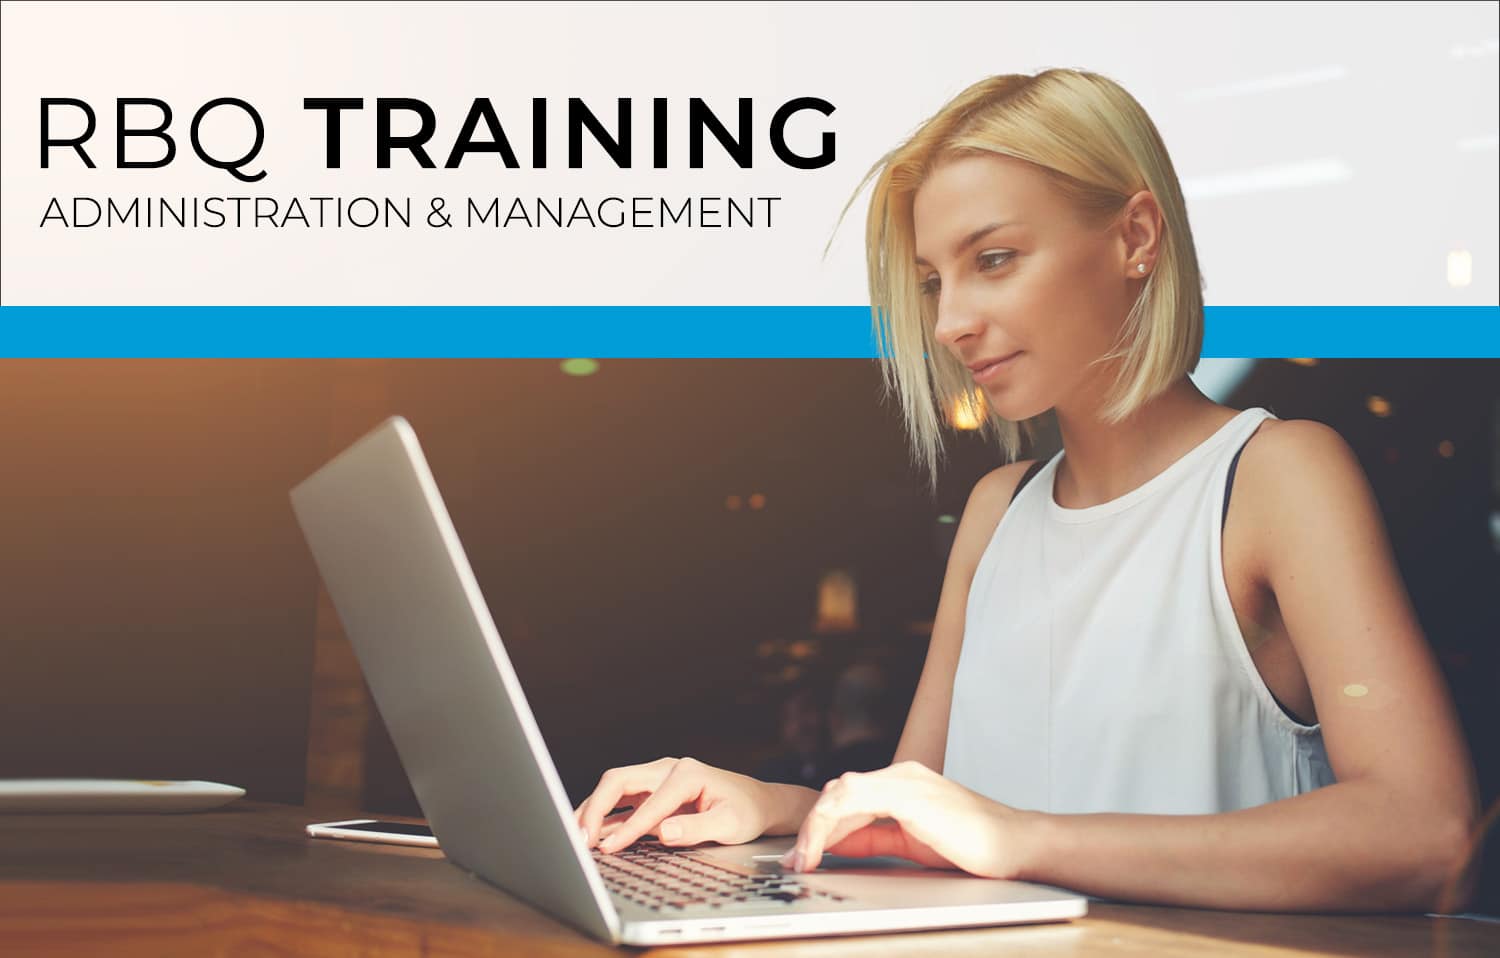 Online RBQ training for the preparation of the administration and management exam